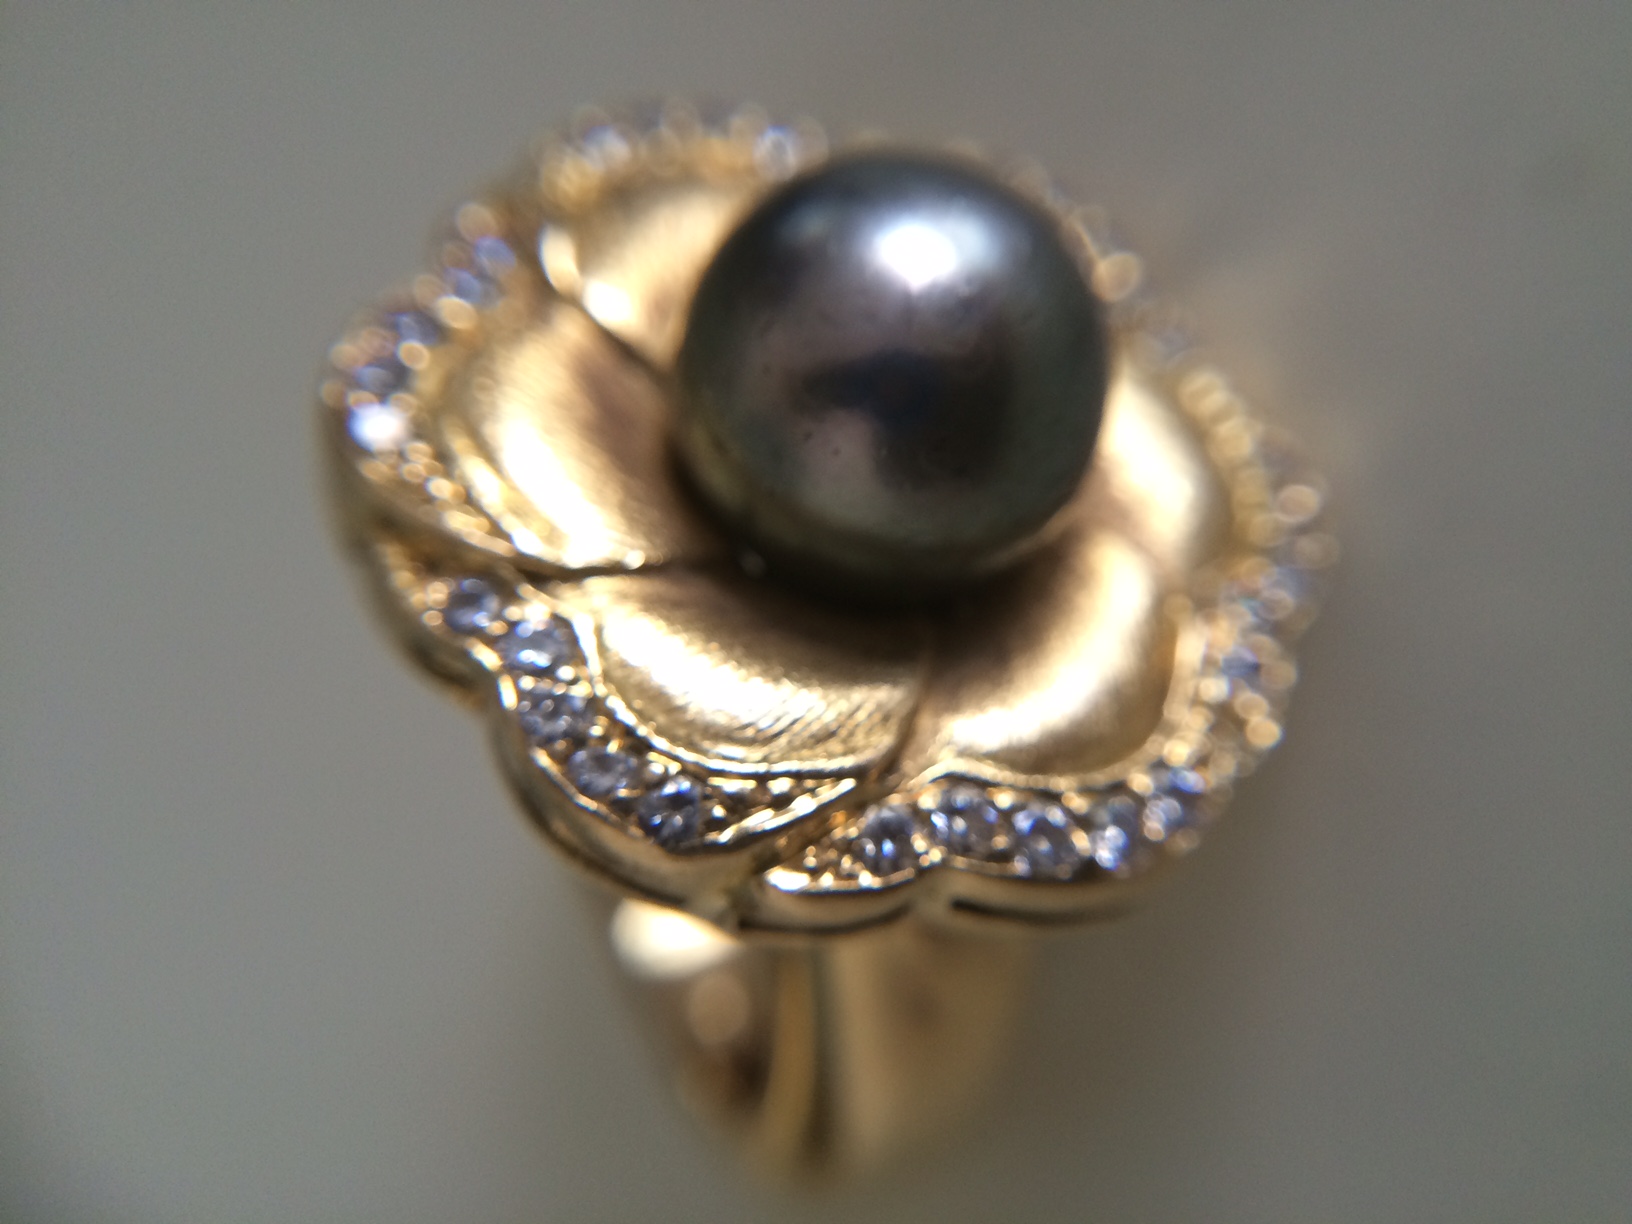  The Gumuchain Tahitian pearl and diamond ring she won at a jewelry event.&nbsp; 